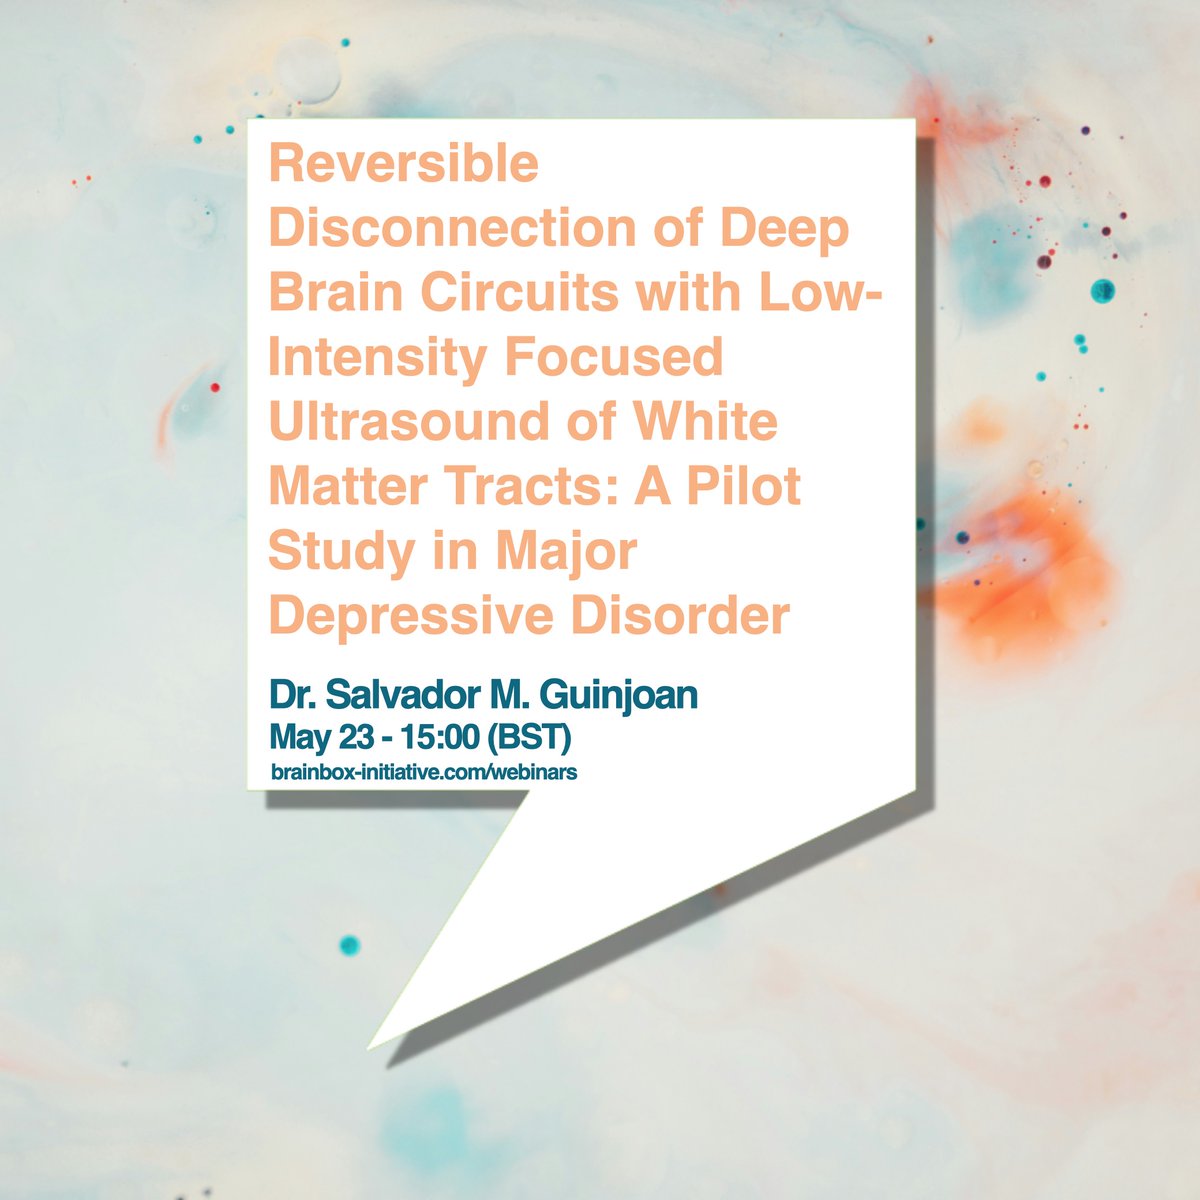 Join us next week as Dr Salvador M. Guinjoan hosts a webinar on low intensity focused ultrasound. This exploration of ultrasound as a non-invasive brain stimulation technique will be highly informative.

Register your place: shorturl.at/lnorO

#NIBS #FreeWebinar #Ultrasound